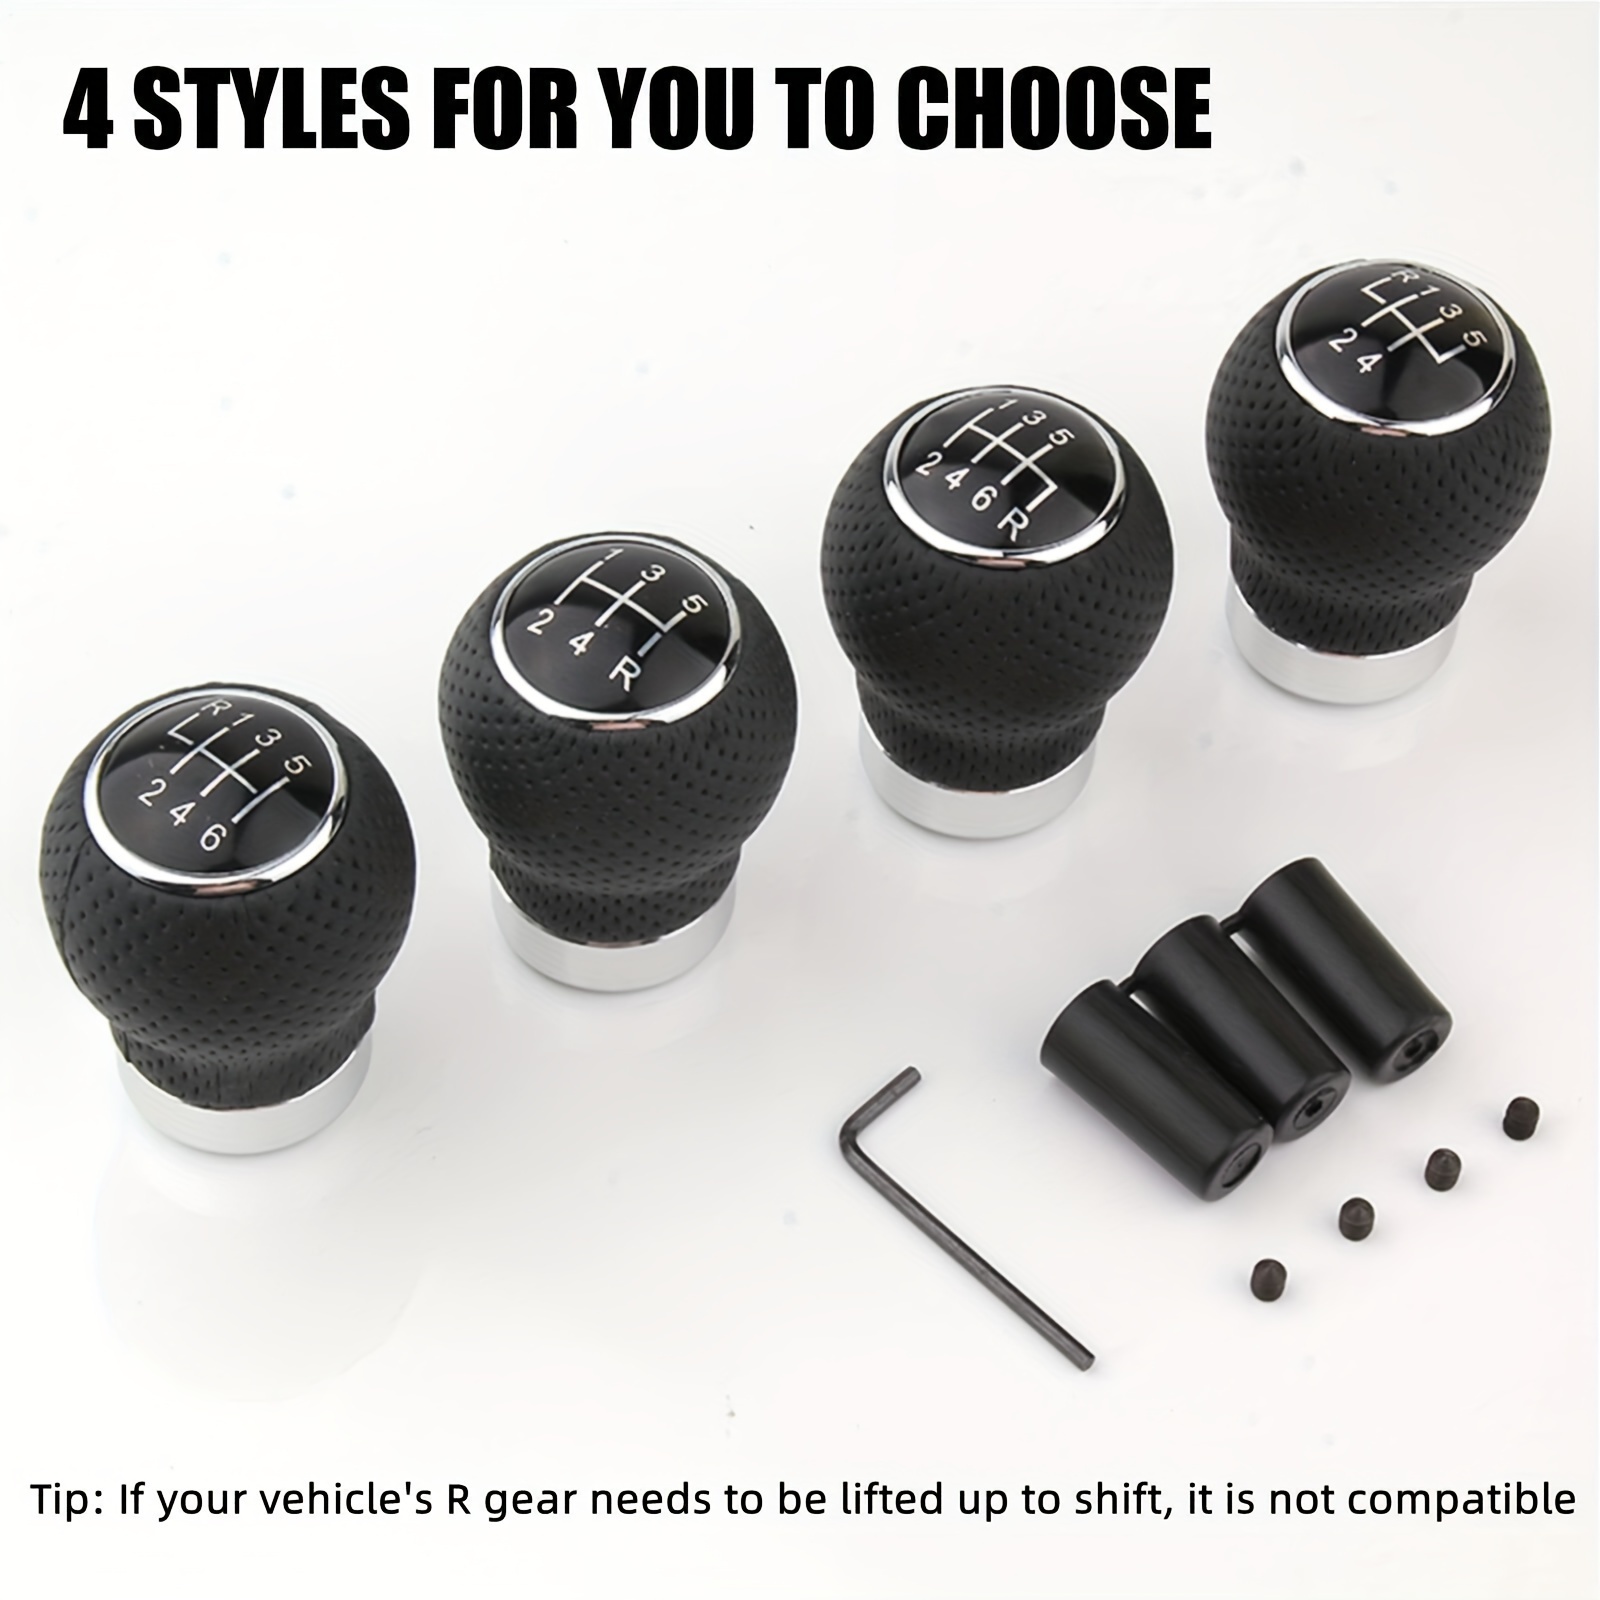 

Universal Shift Knob Manual Gearbox Shift Knobs Fit For Most Car Transport Vehicles